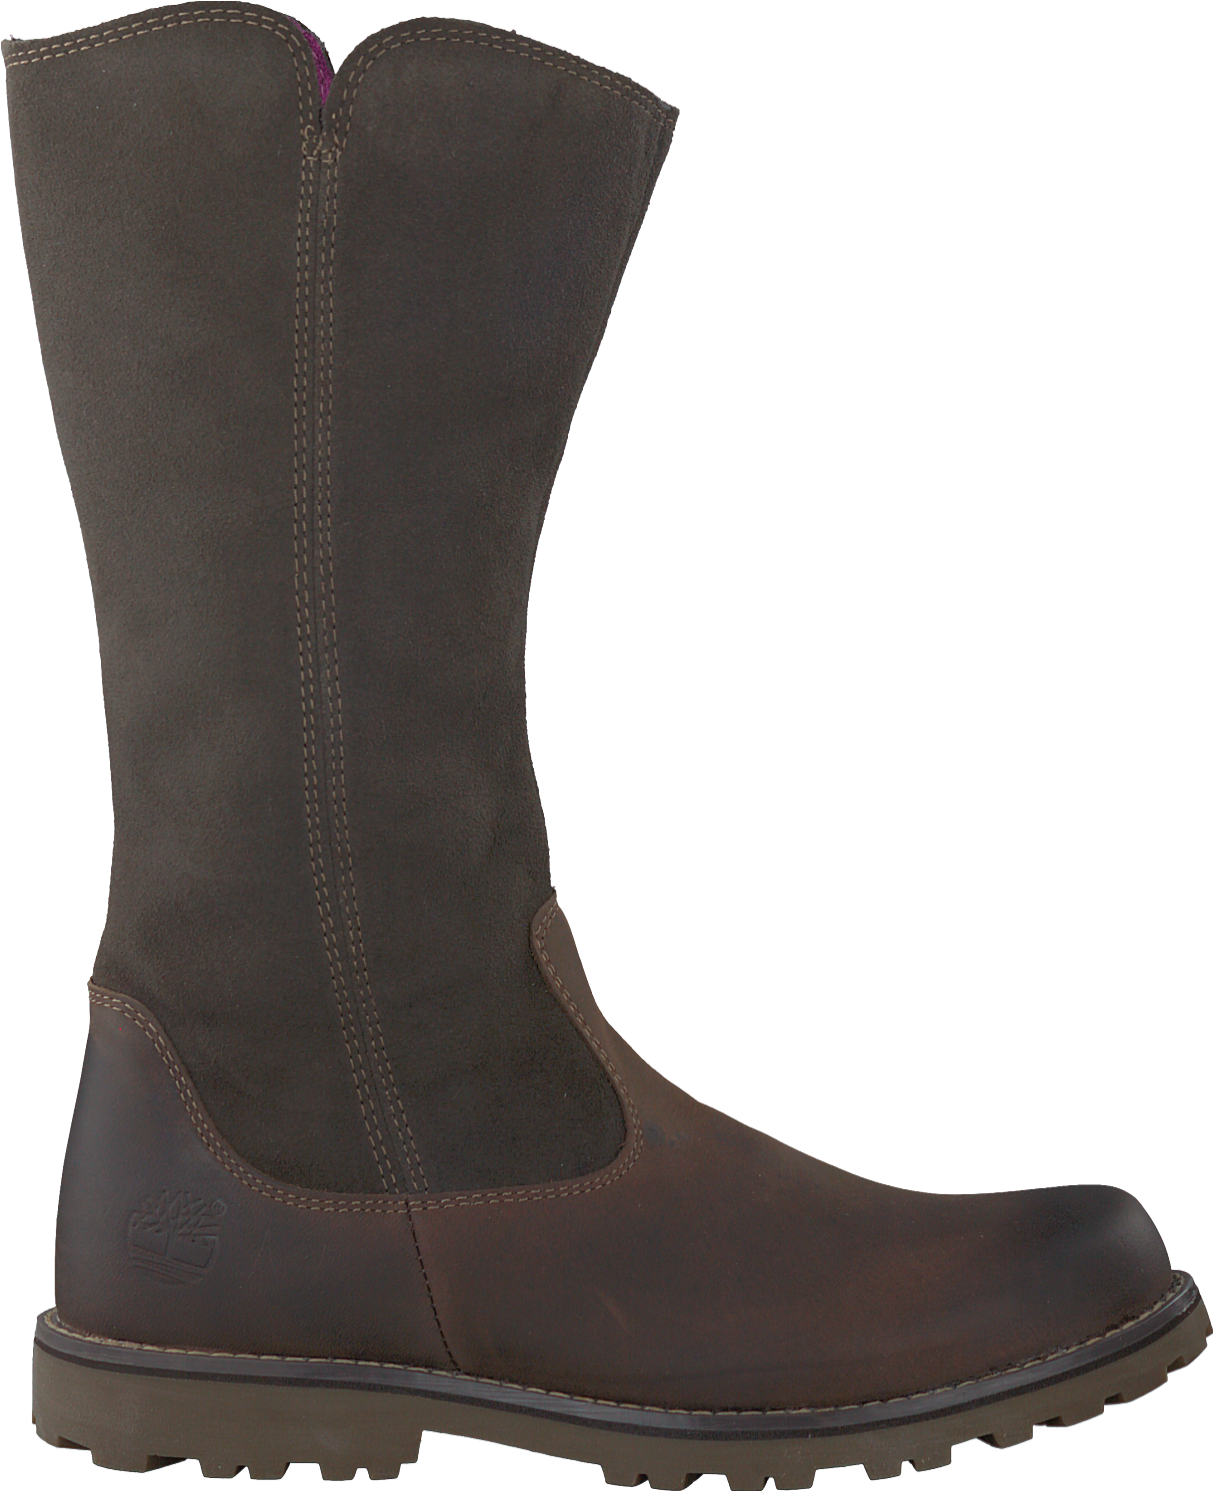 Dark Brown Leather Knee High Boot PNG image